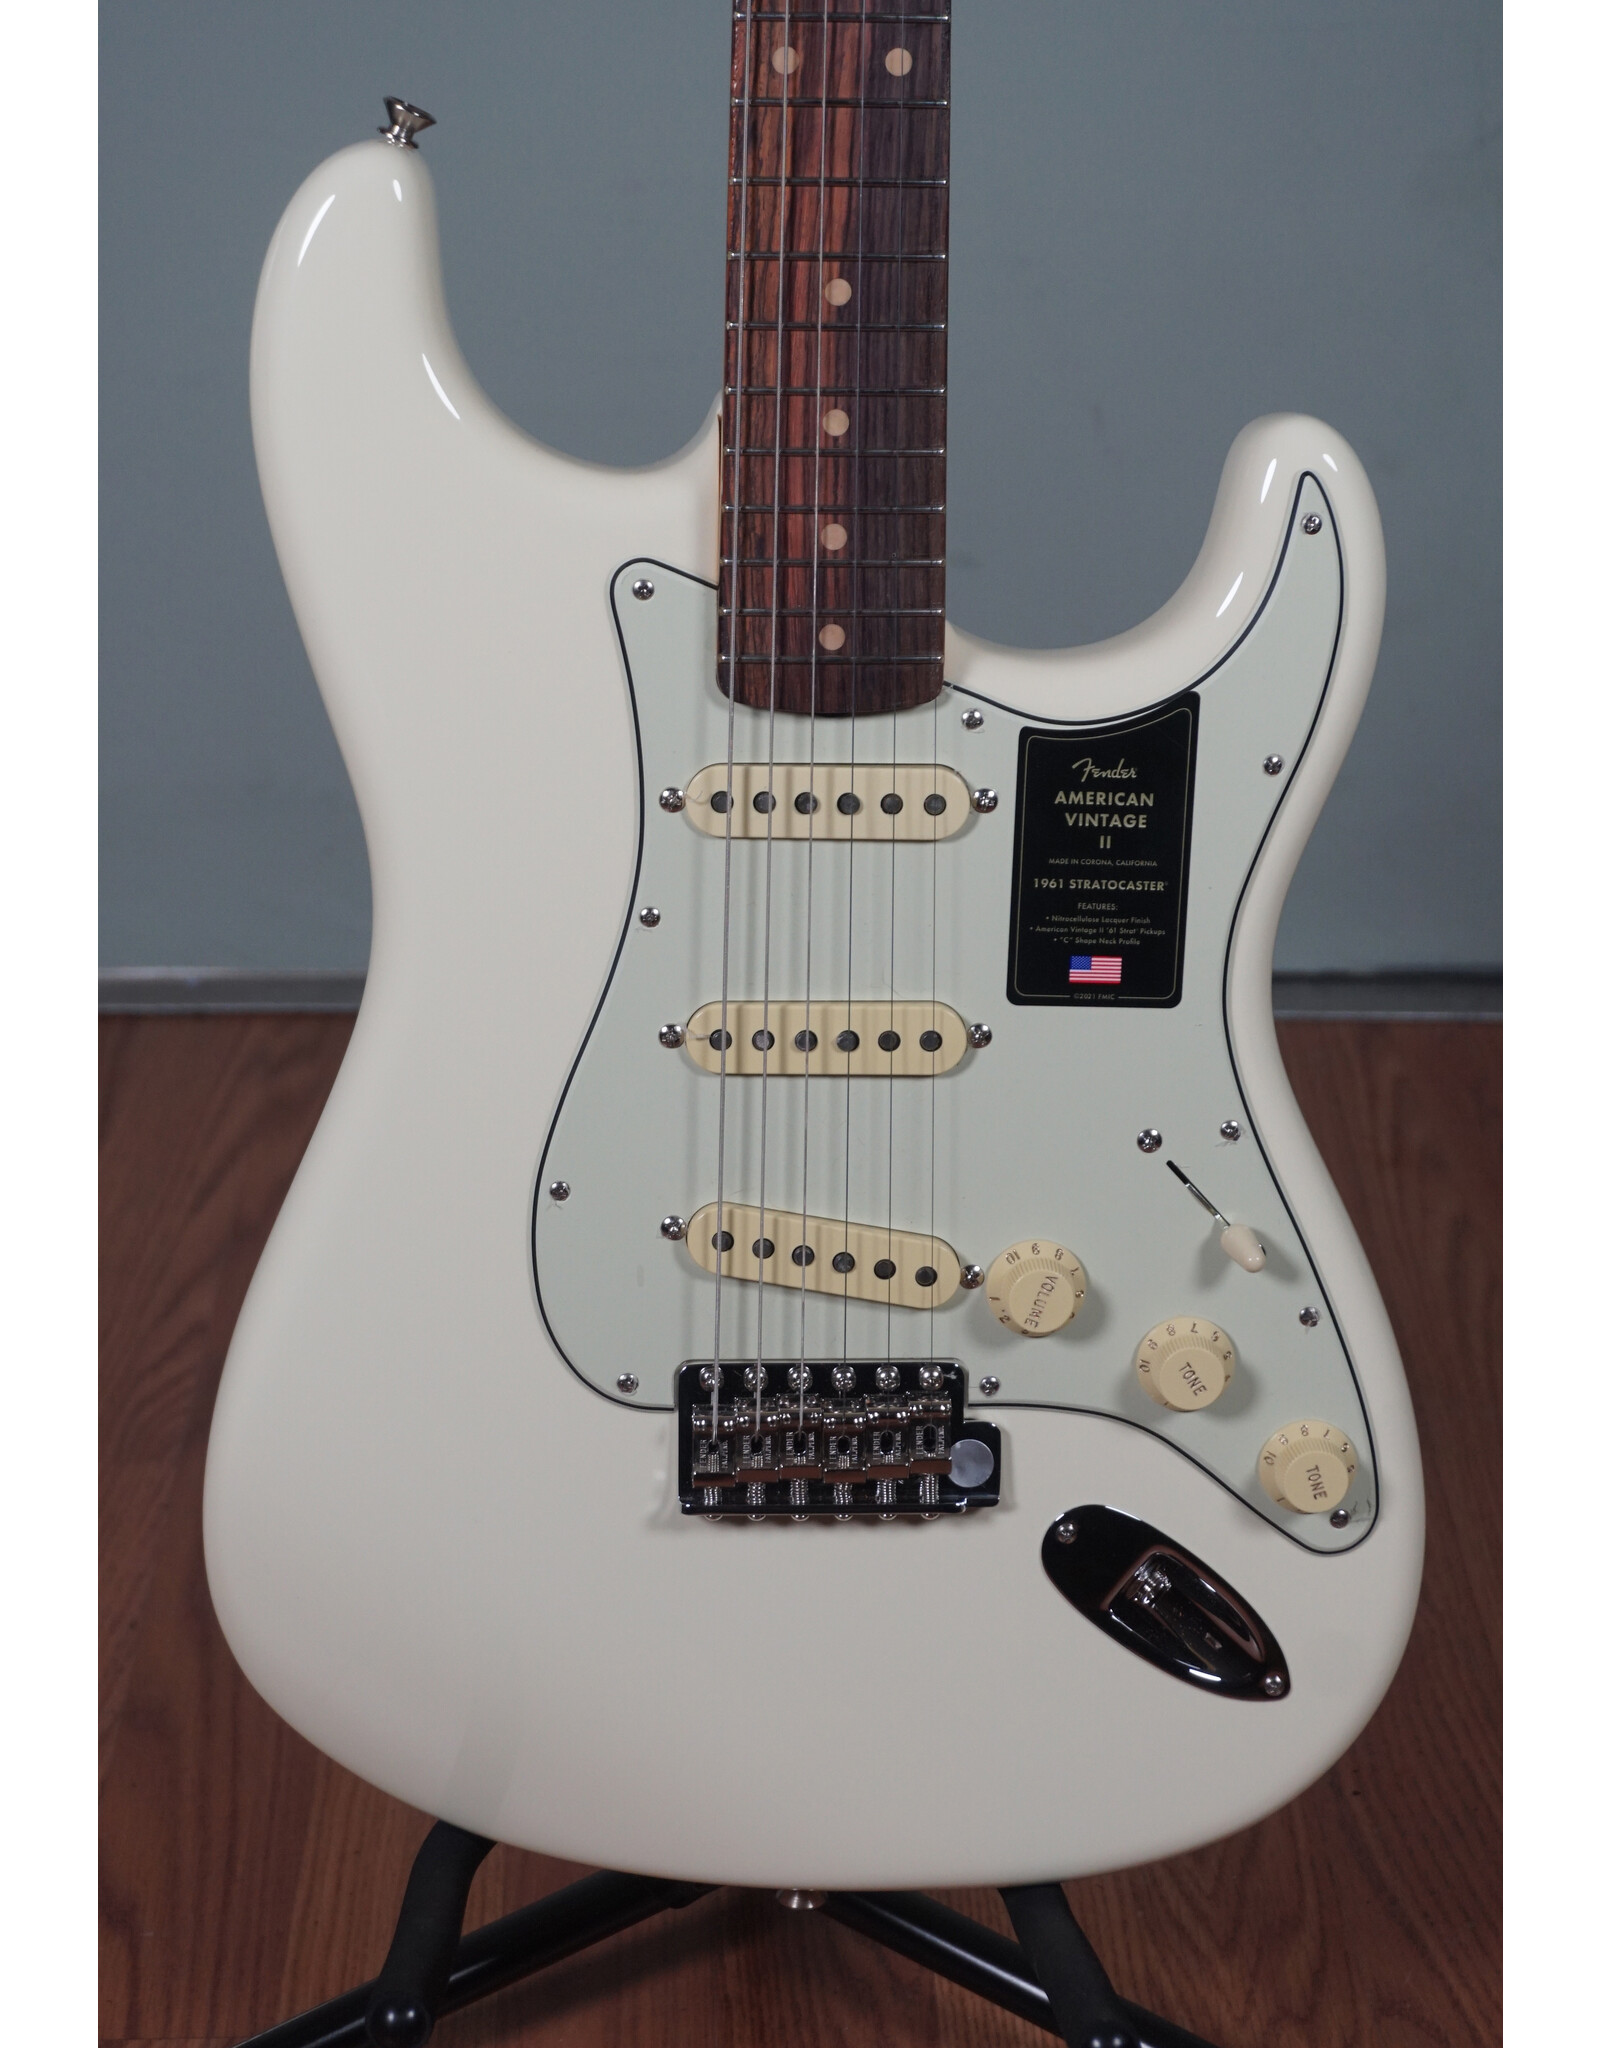 Fender Fender American Vintage II 1961 Stratocaster, Olympic White w/ Vintage-Style Brown HSC